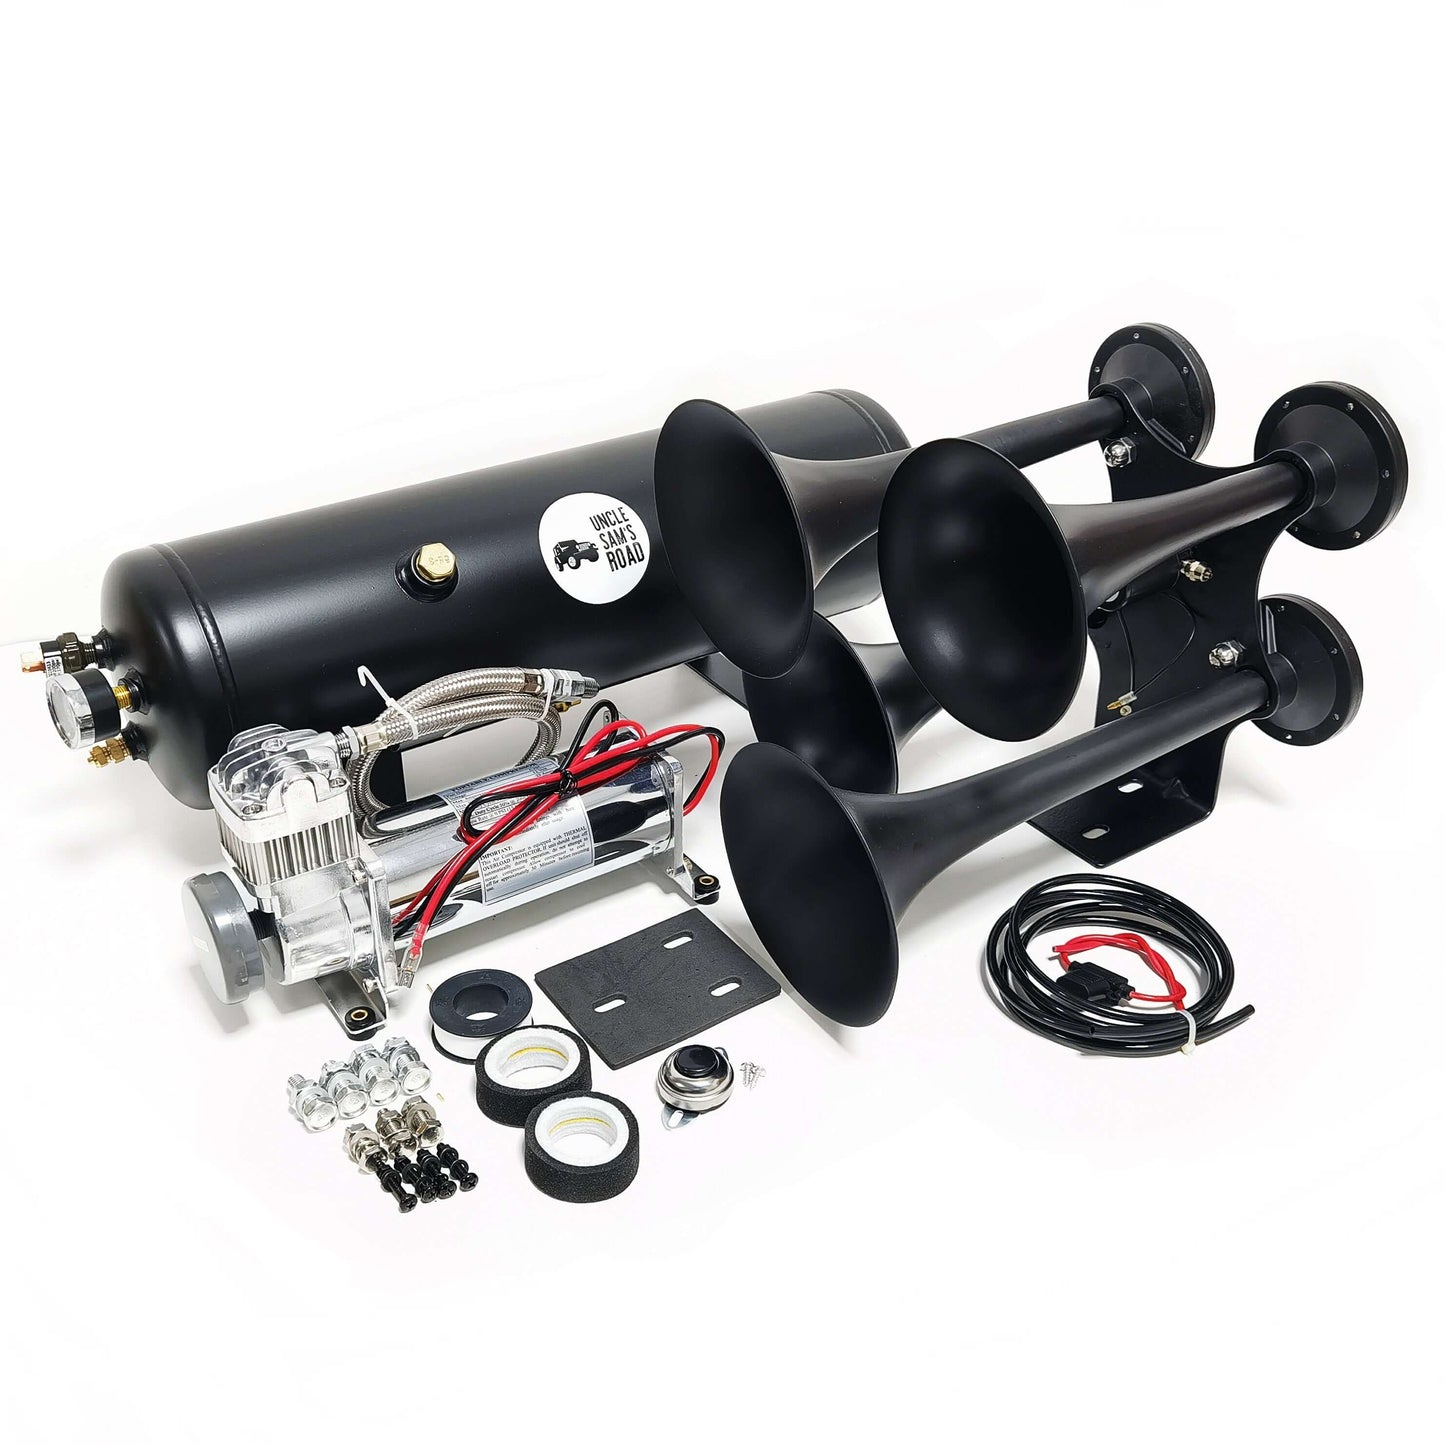 [UNIQUE OFFER] Cyclone 3Gal Train Horn Kit Uncle Sam's Road 